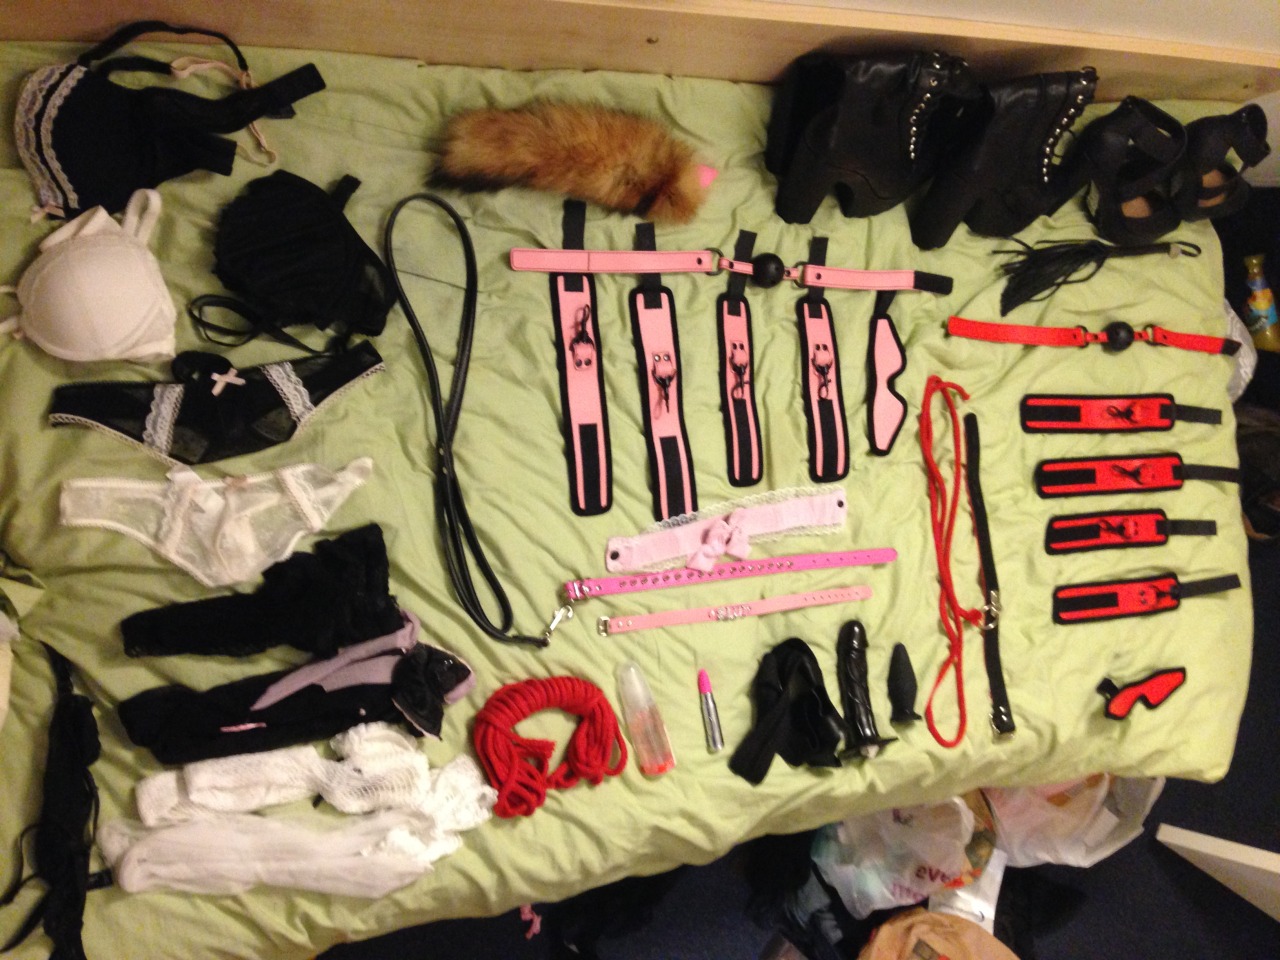 Was organising my sex and bondage gear, and decided to lay everything out and take